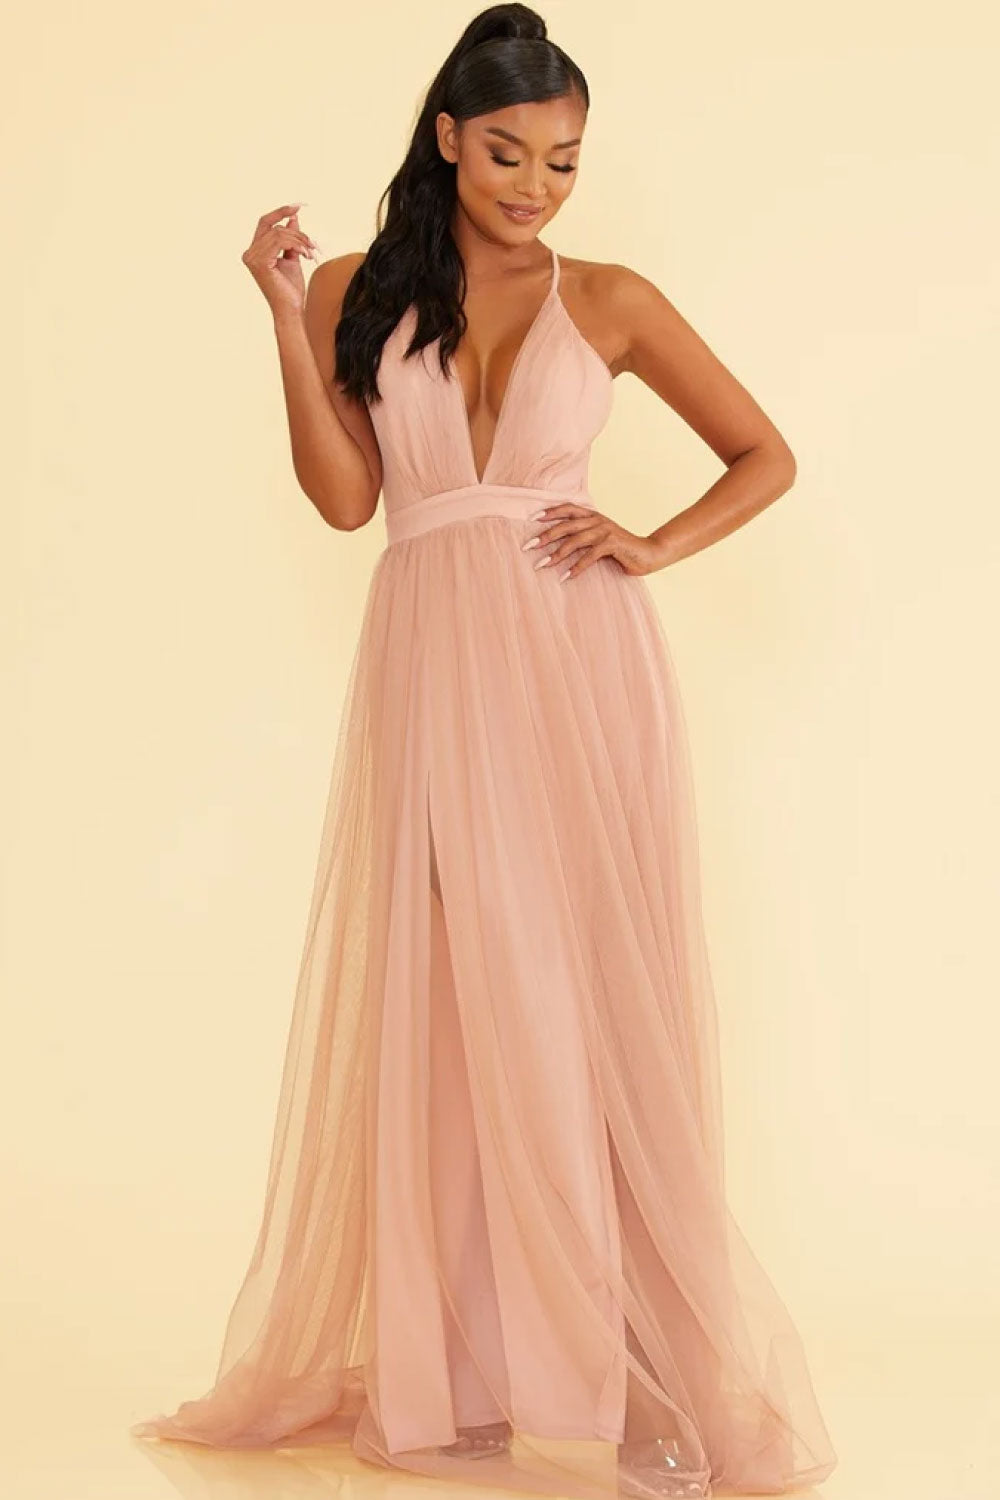 Image of the front of Luxxel's Elegant Deep V-Neck Maxi Dress in Blush on a model.